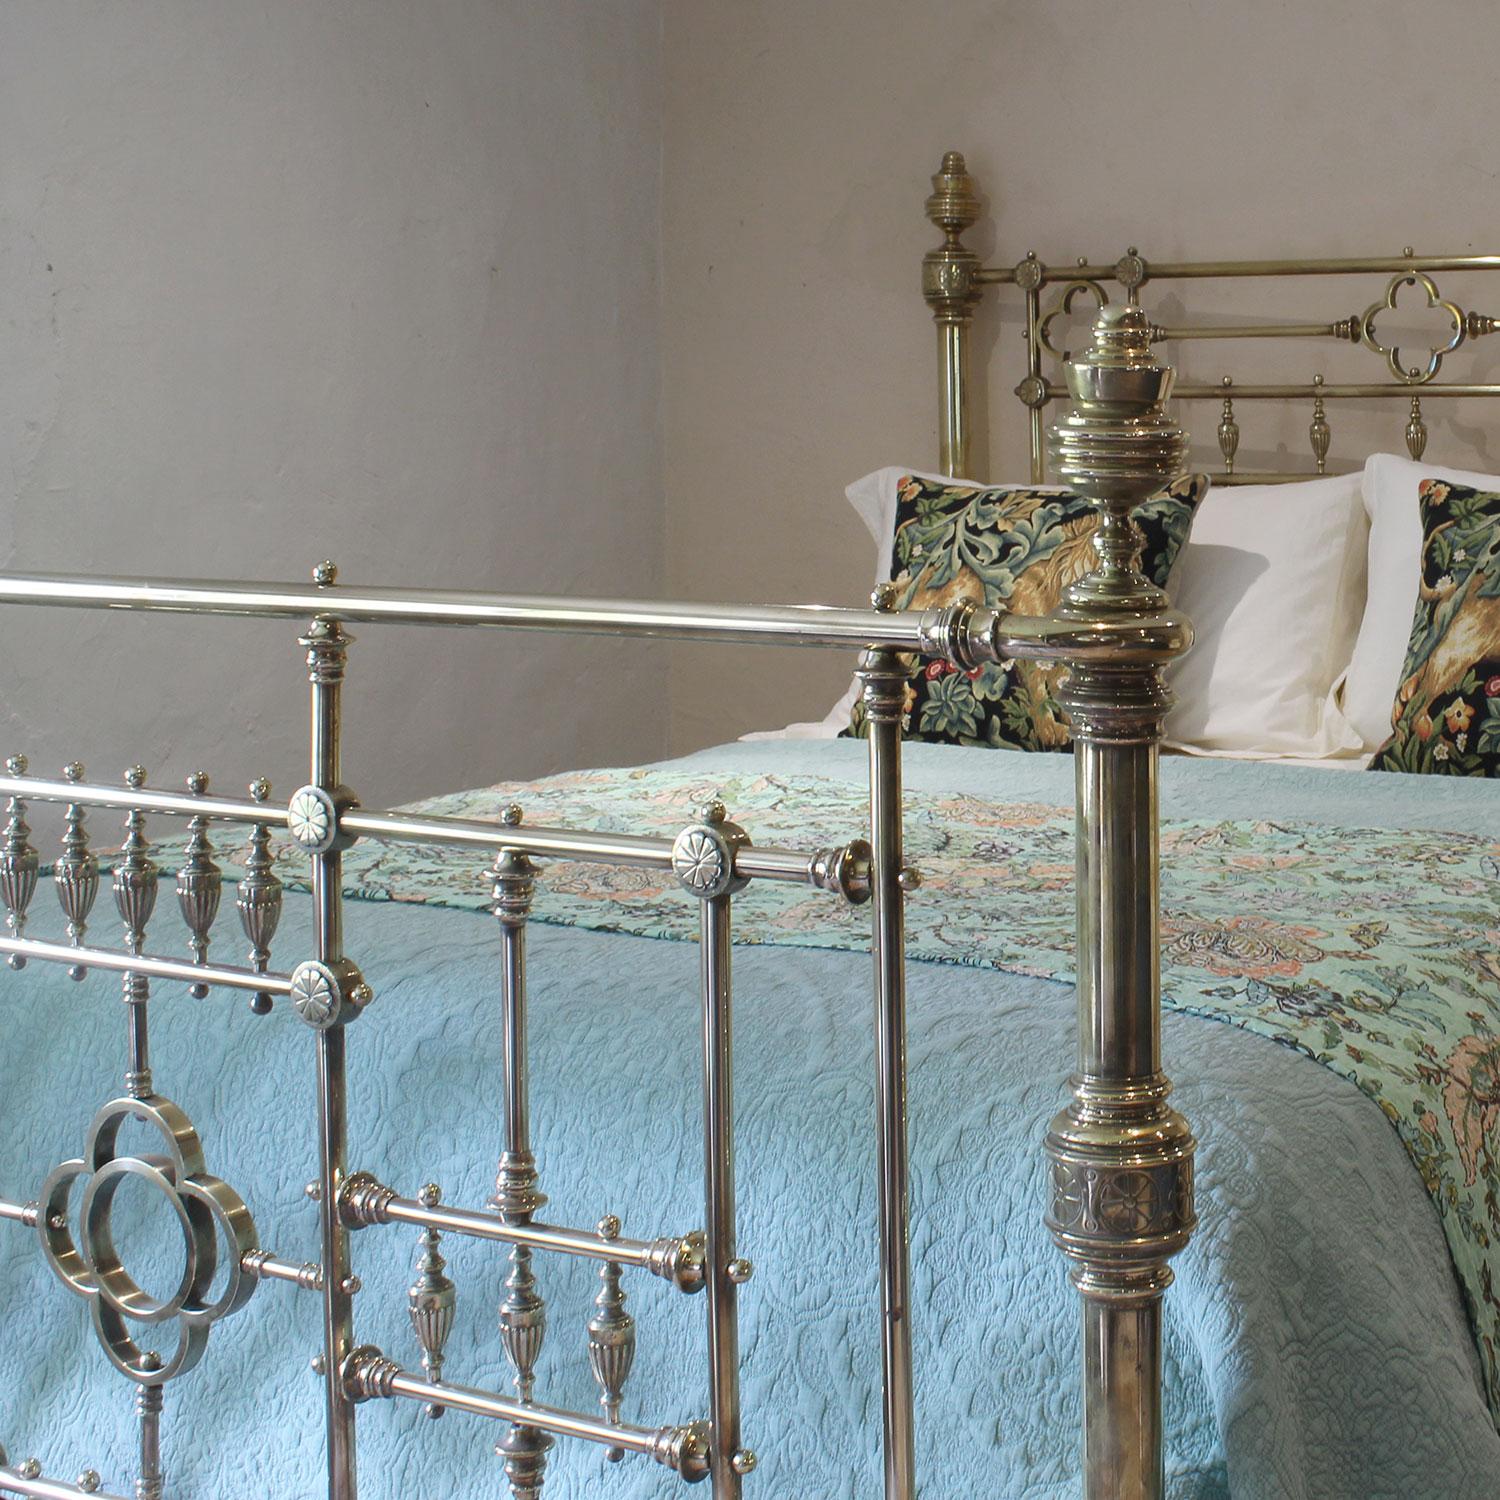 Late Victorian Decorative Victorian All Brass Antique Bed MK306 For Sale